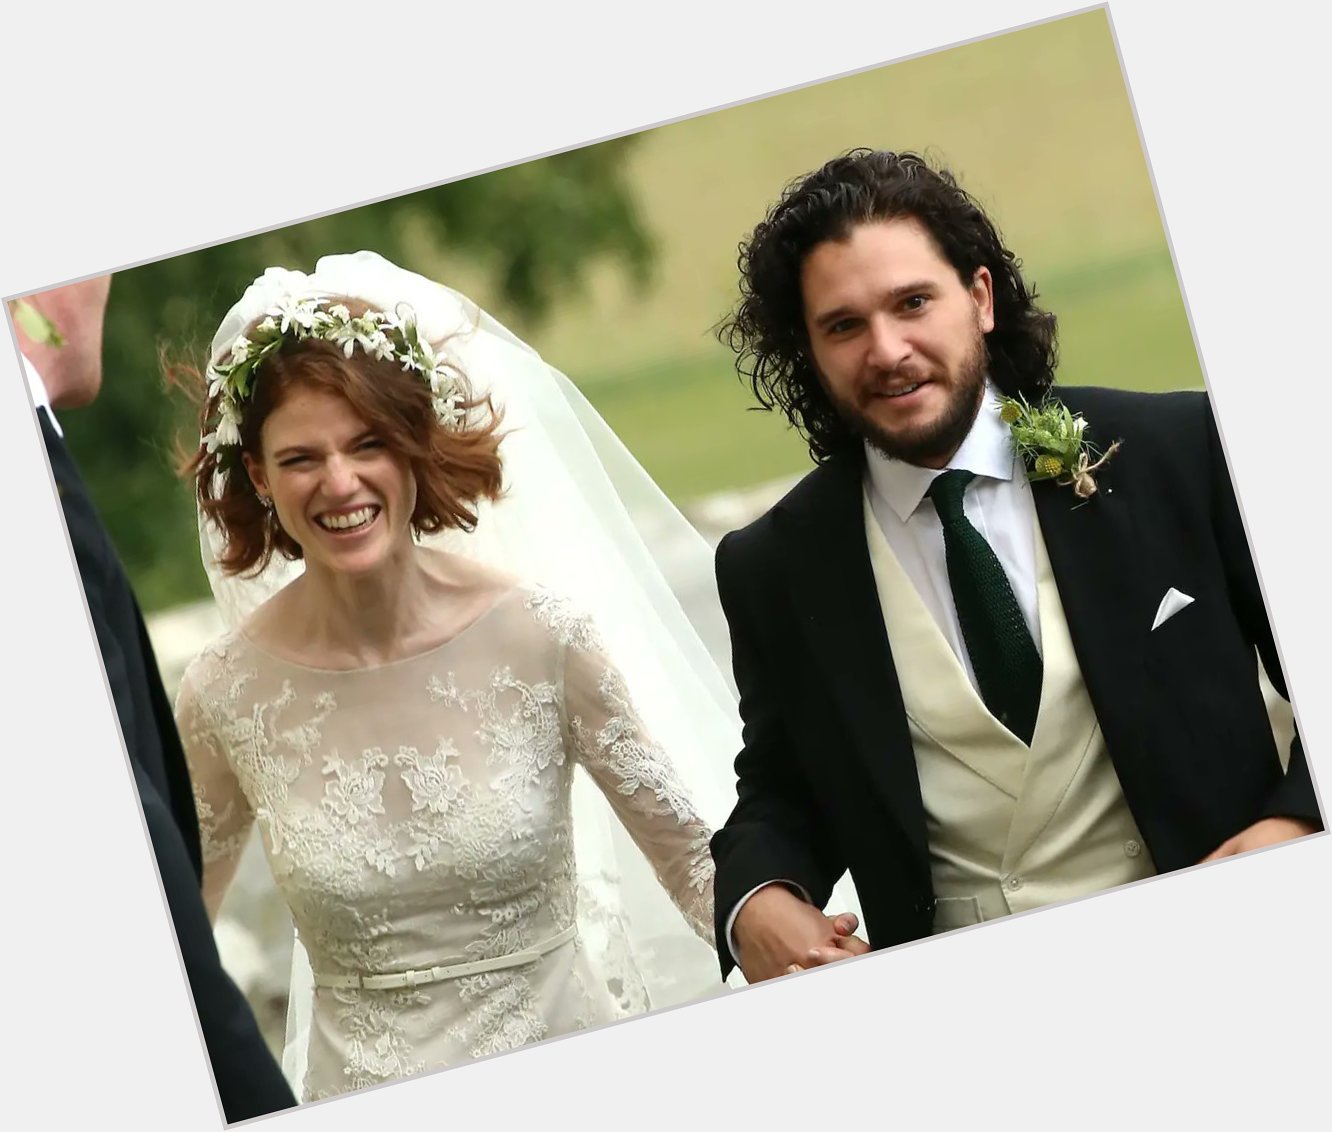 Happy Birthday Rose Leslie. She and Kit Harington are also having another baby this year too. 